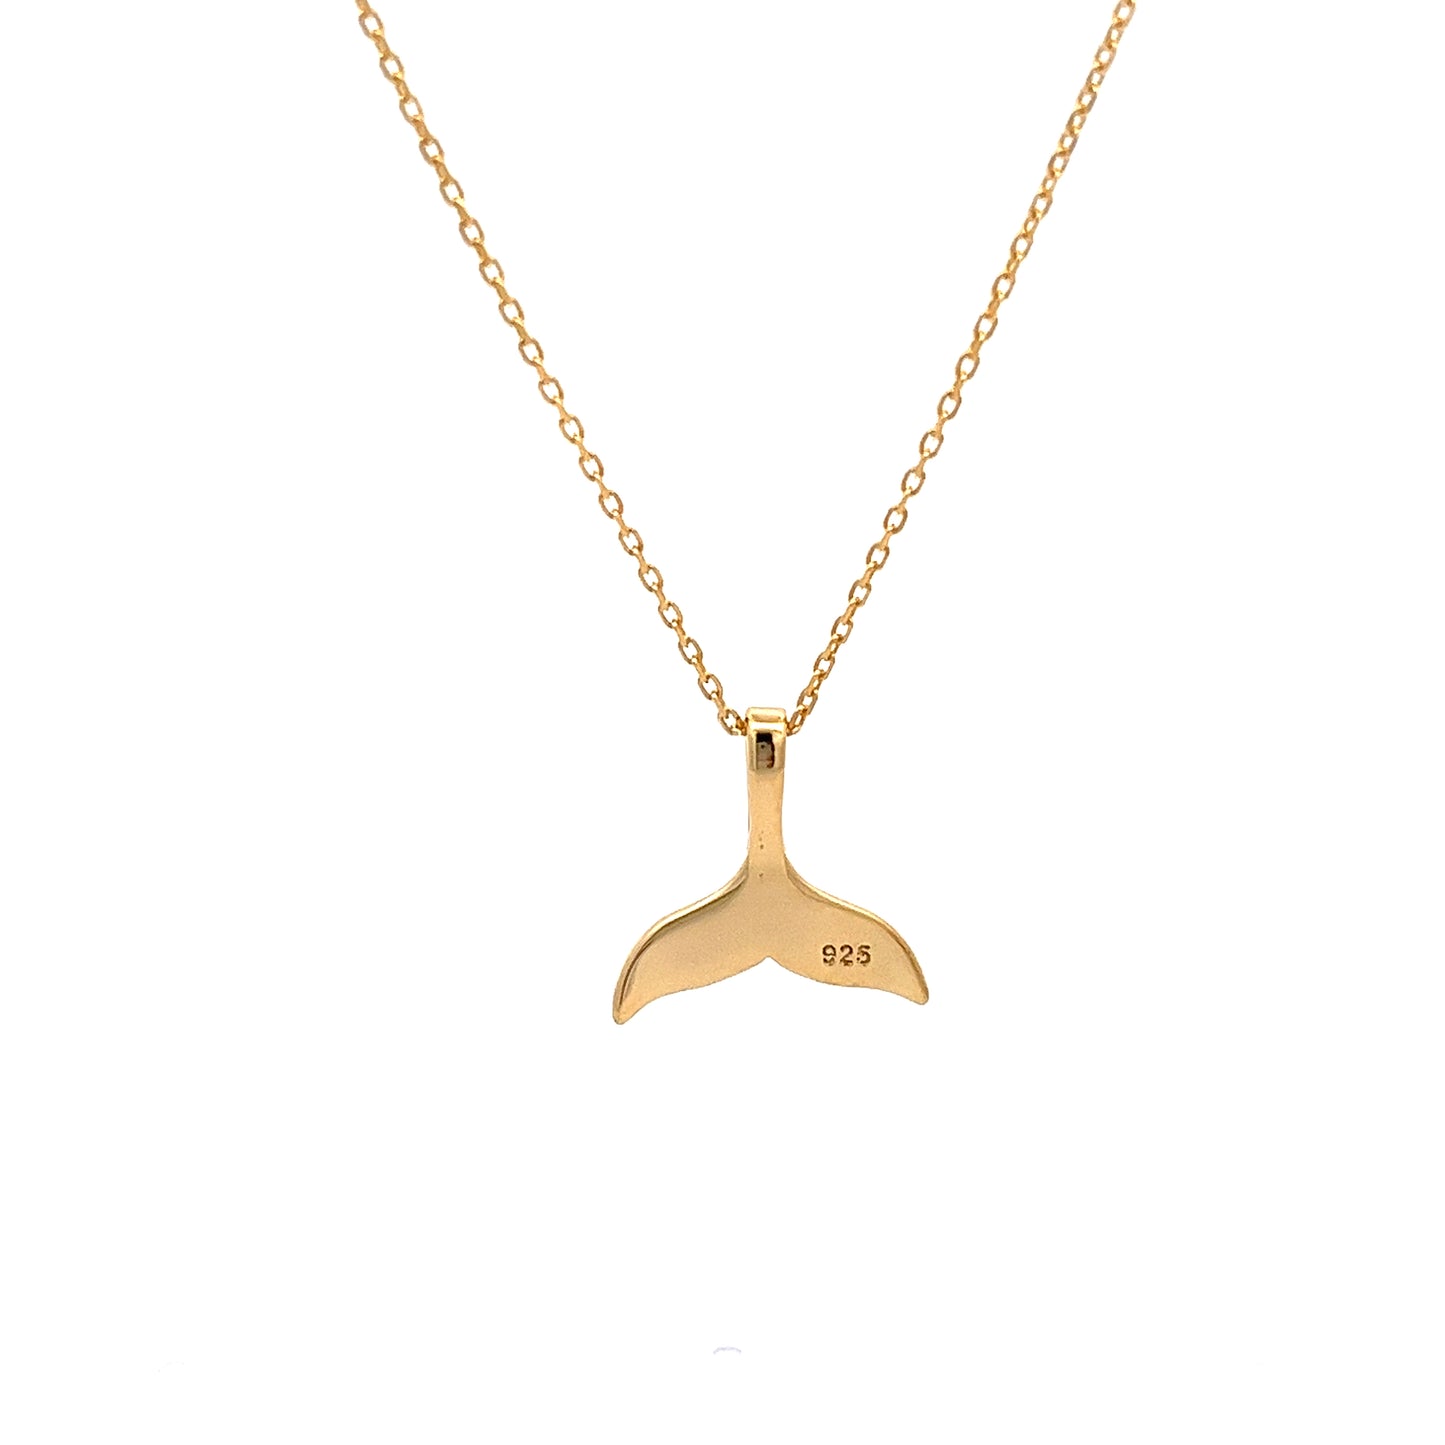 Whale Tale Necklace in Gold